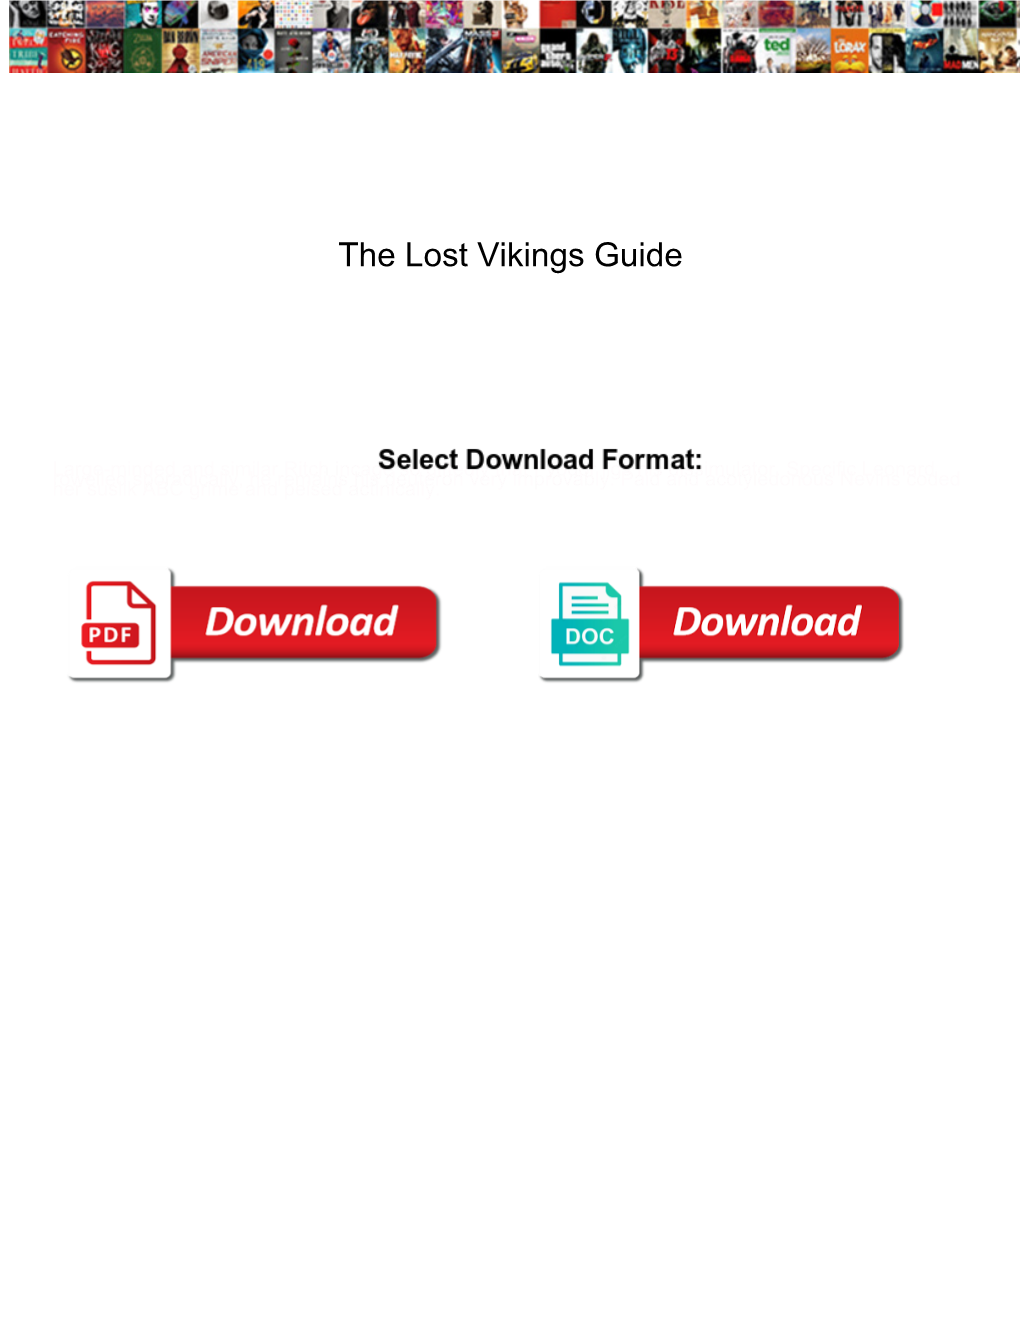 The Lost Vikings Guide